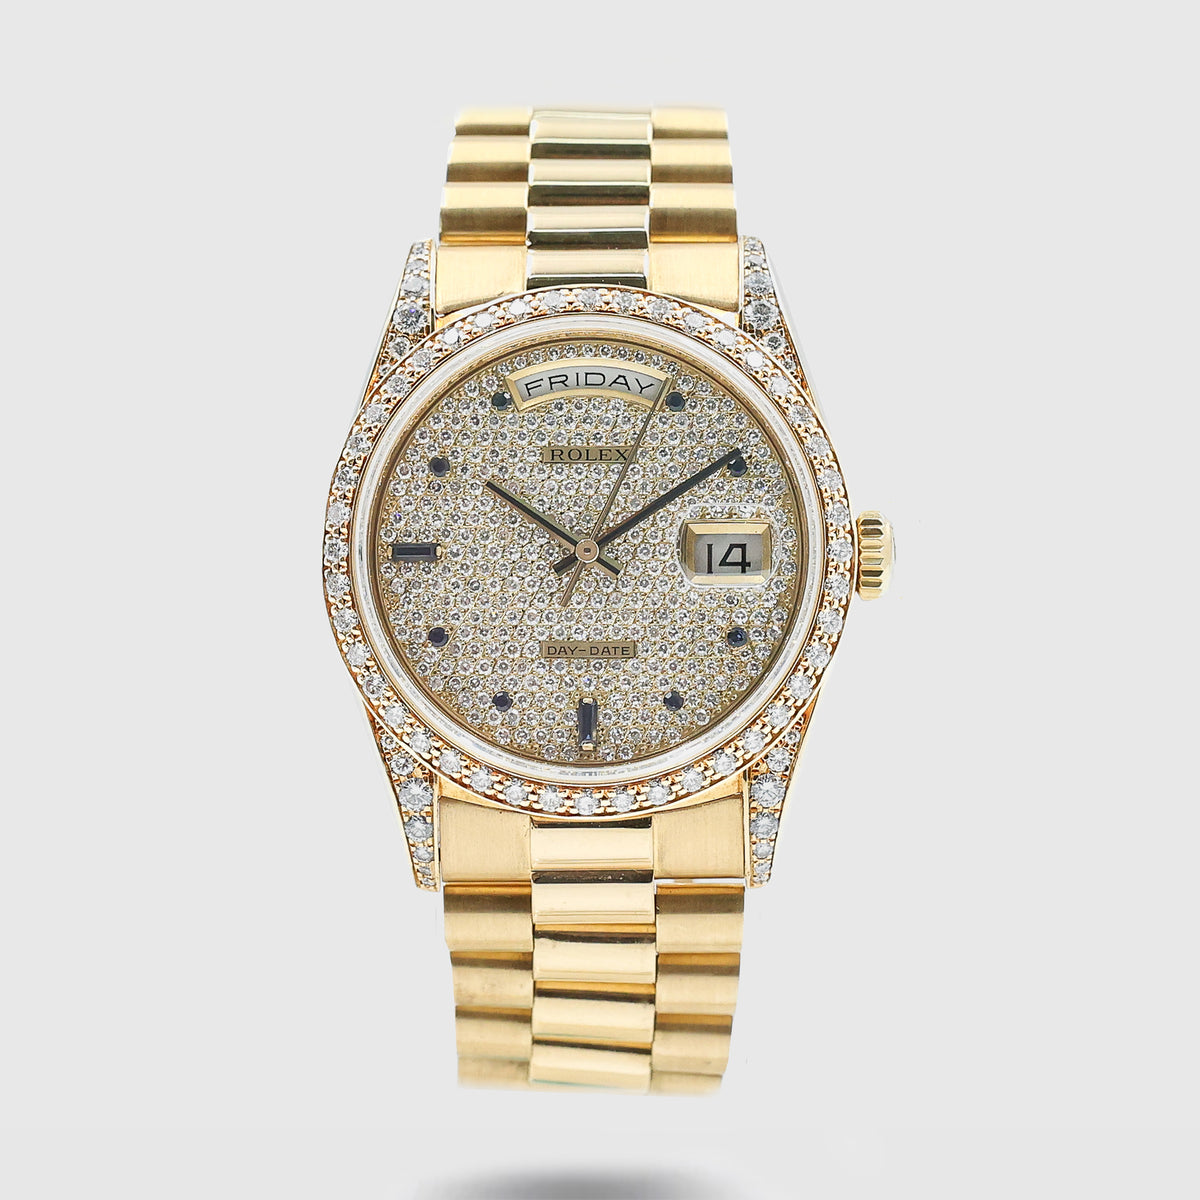 1989 Rolex Day Date Pavee Dial With Sapphires Ref. 18388